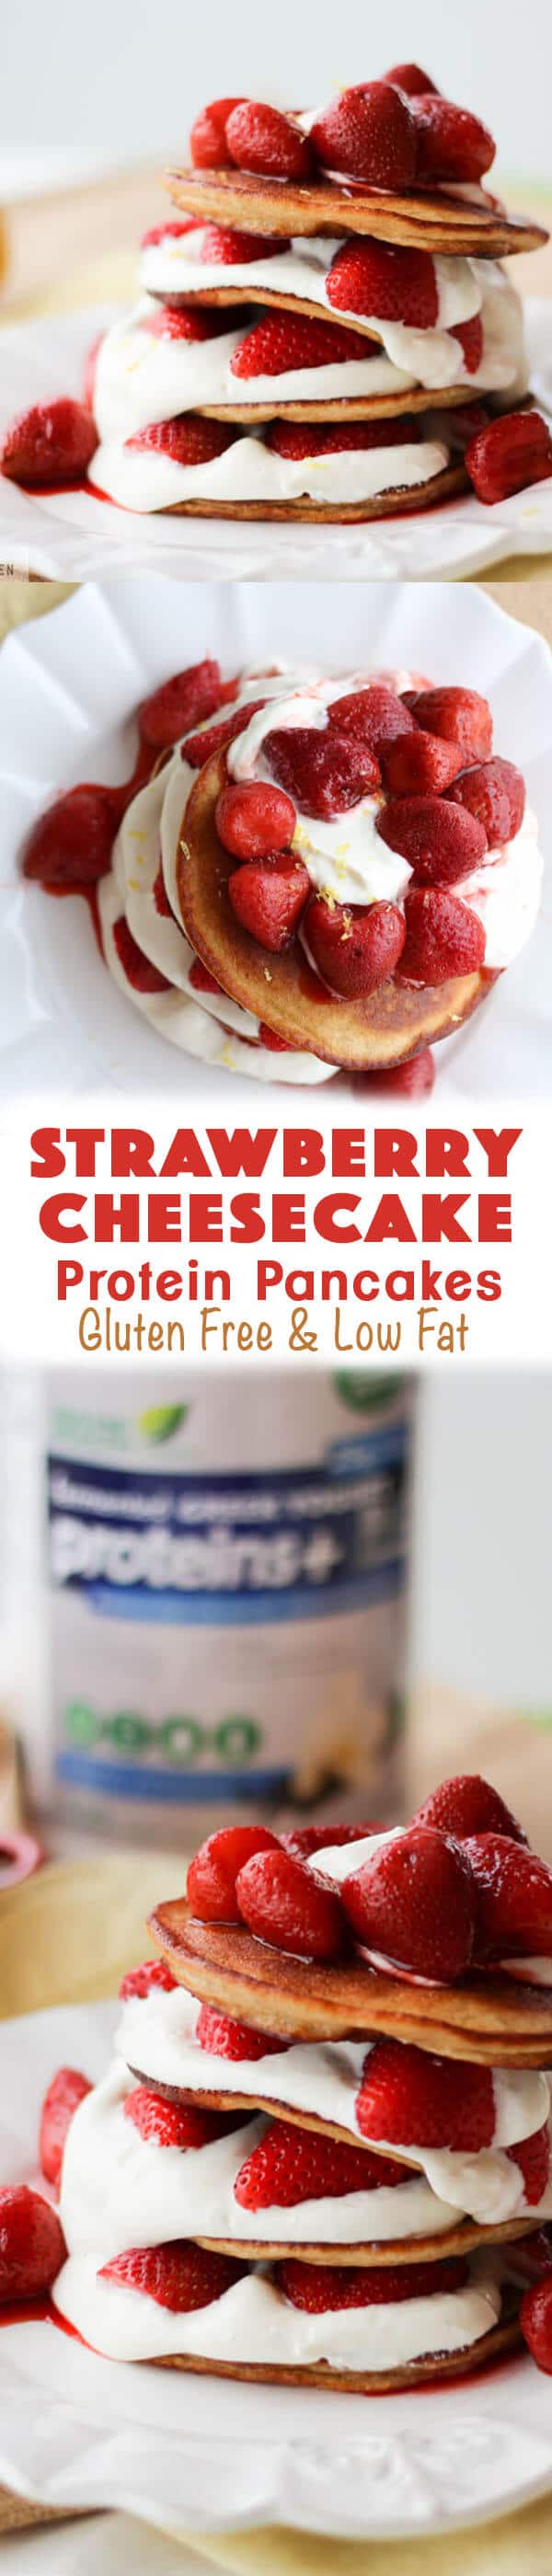 A pinterest photo of stacks of pancakes with the overlay text \"Strawberry Cheesecake Protein Pancakes Gluten Free & Low Fat.\"